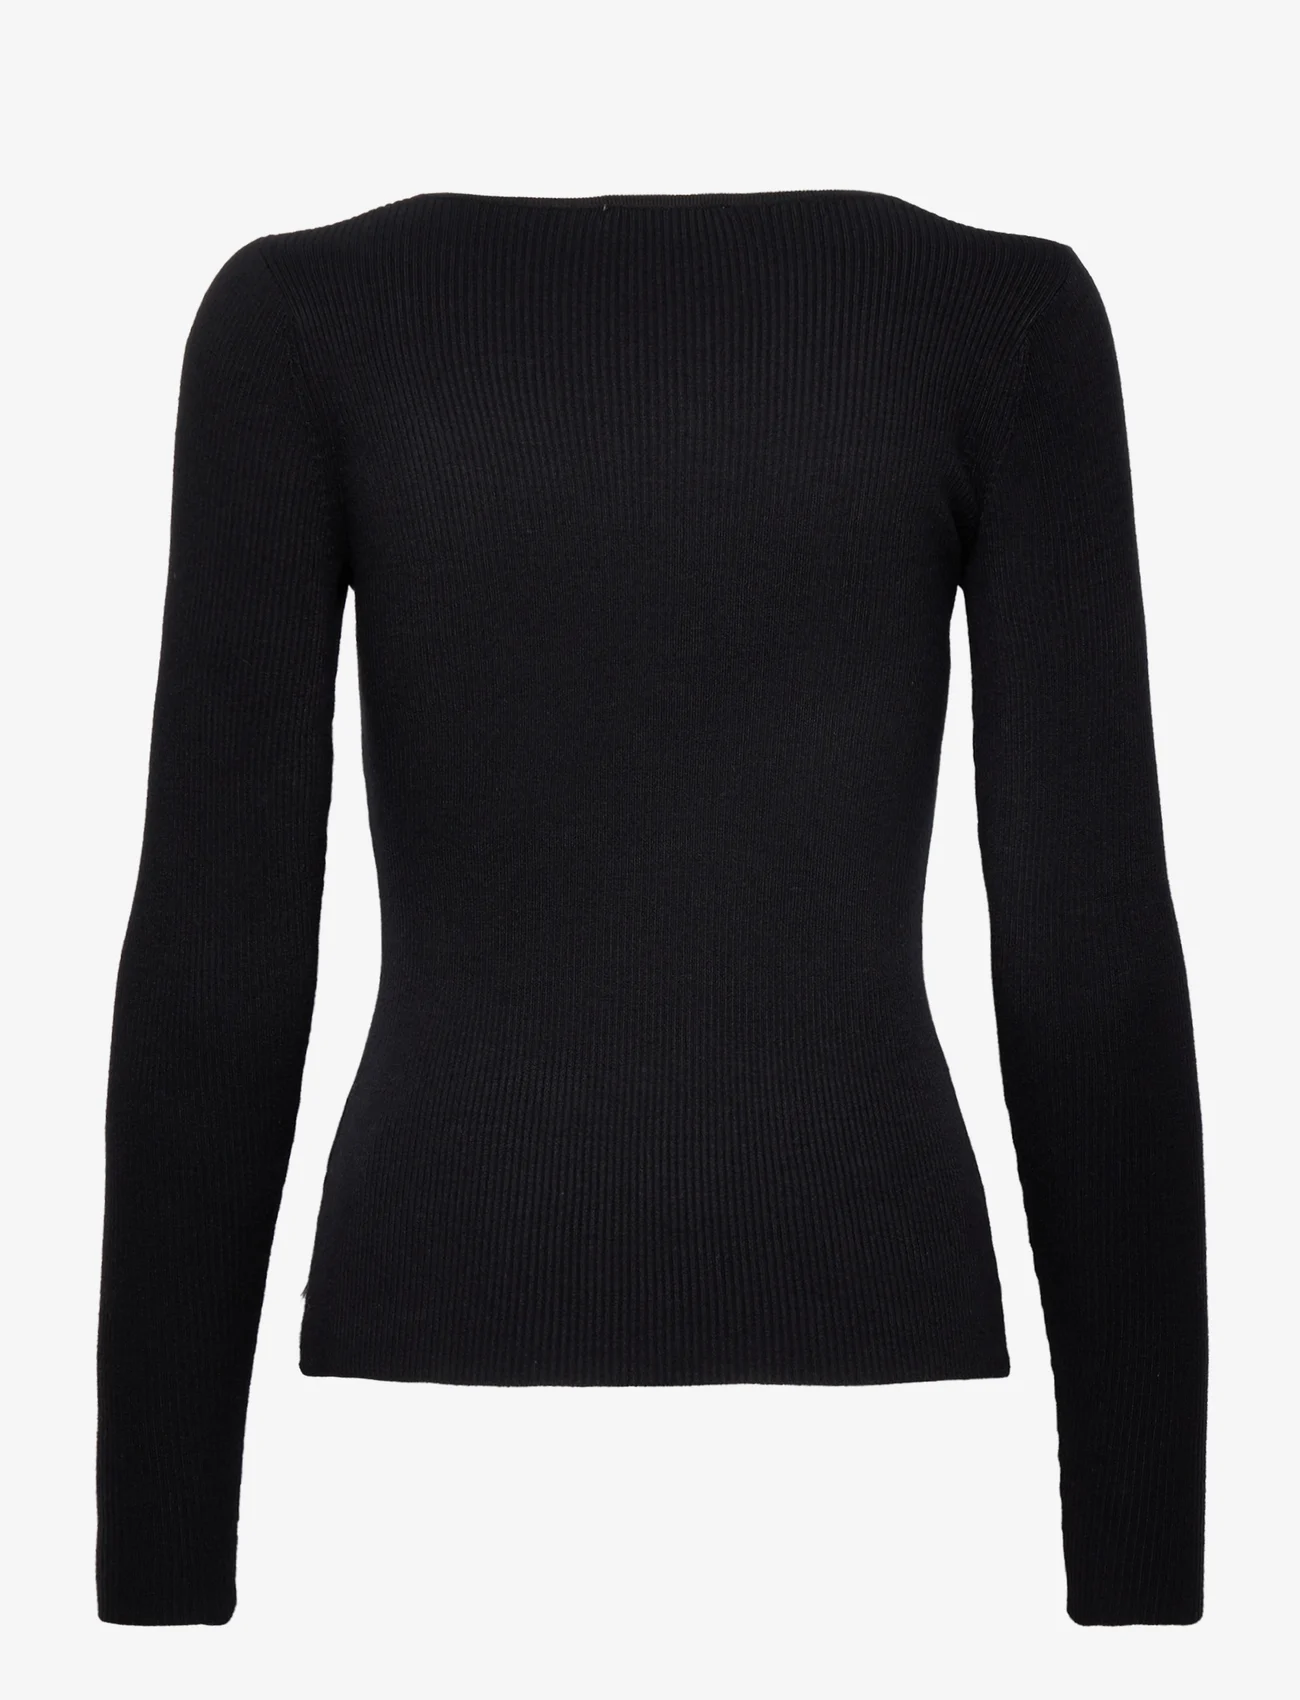 Coster Copenhagen - Knit with long sleeves and squared - džemperi - black - 1